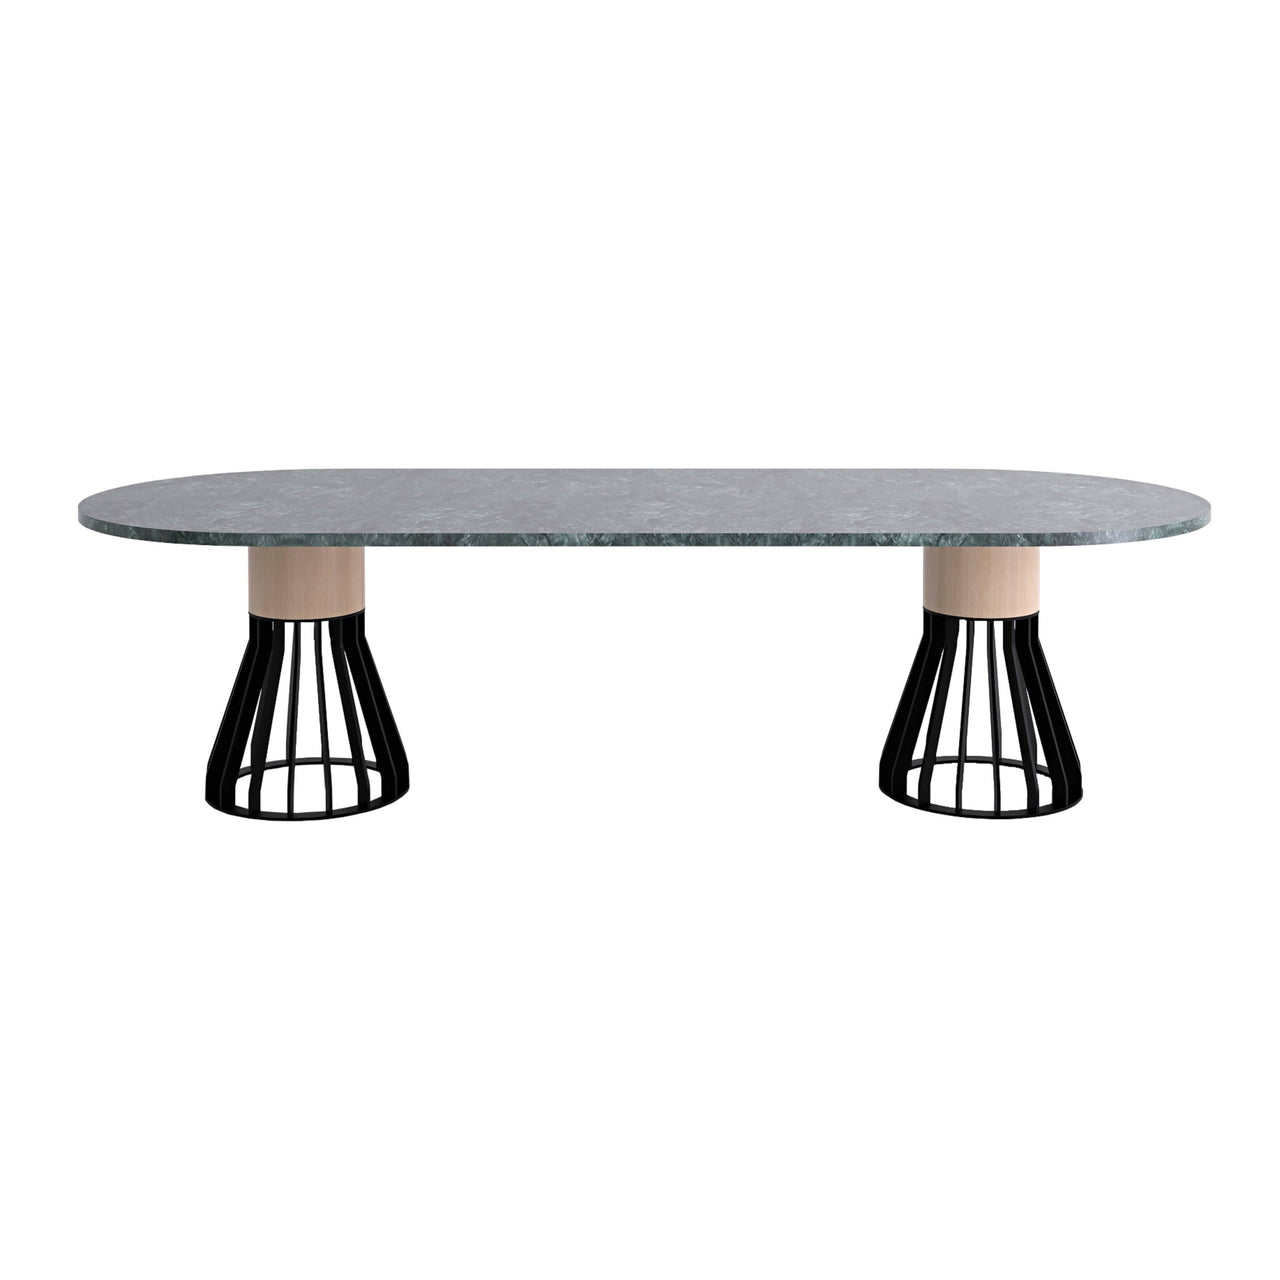 Mewoma Dining Table: Oblong + Indian Green Marble